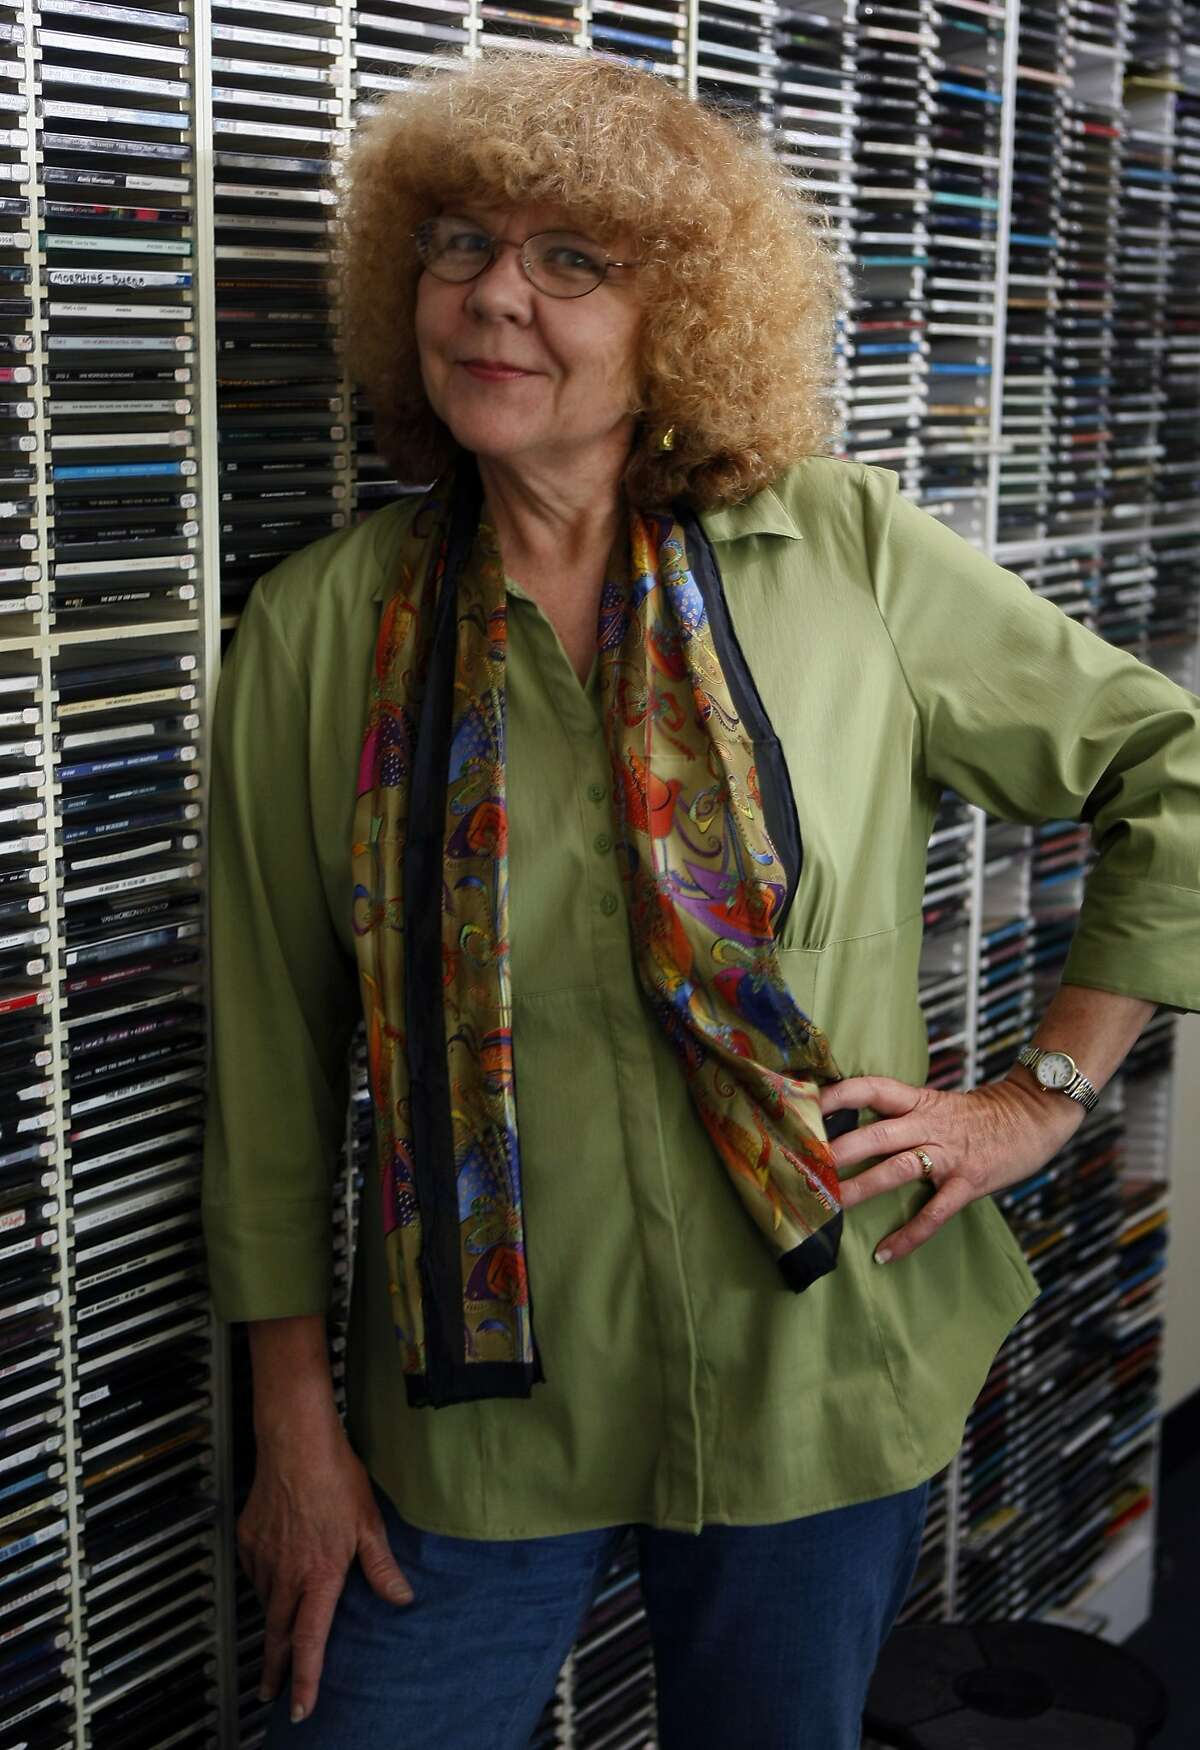 KFOG radio personality Rosalie Howarth stands in front of thousands of CD's in the On Air Studio in San Francisco Friday July 10, 2009